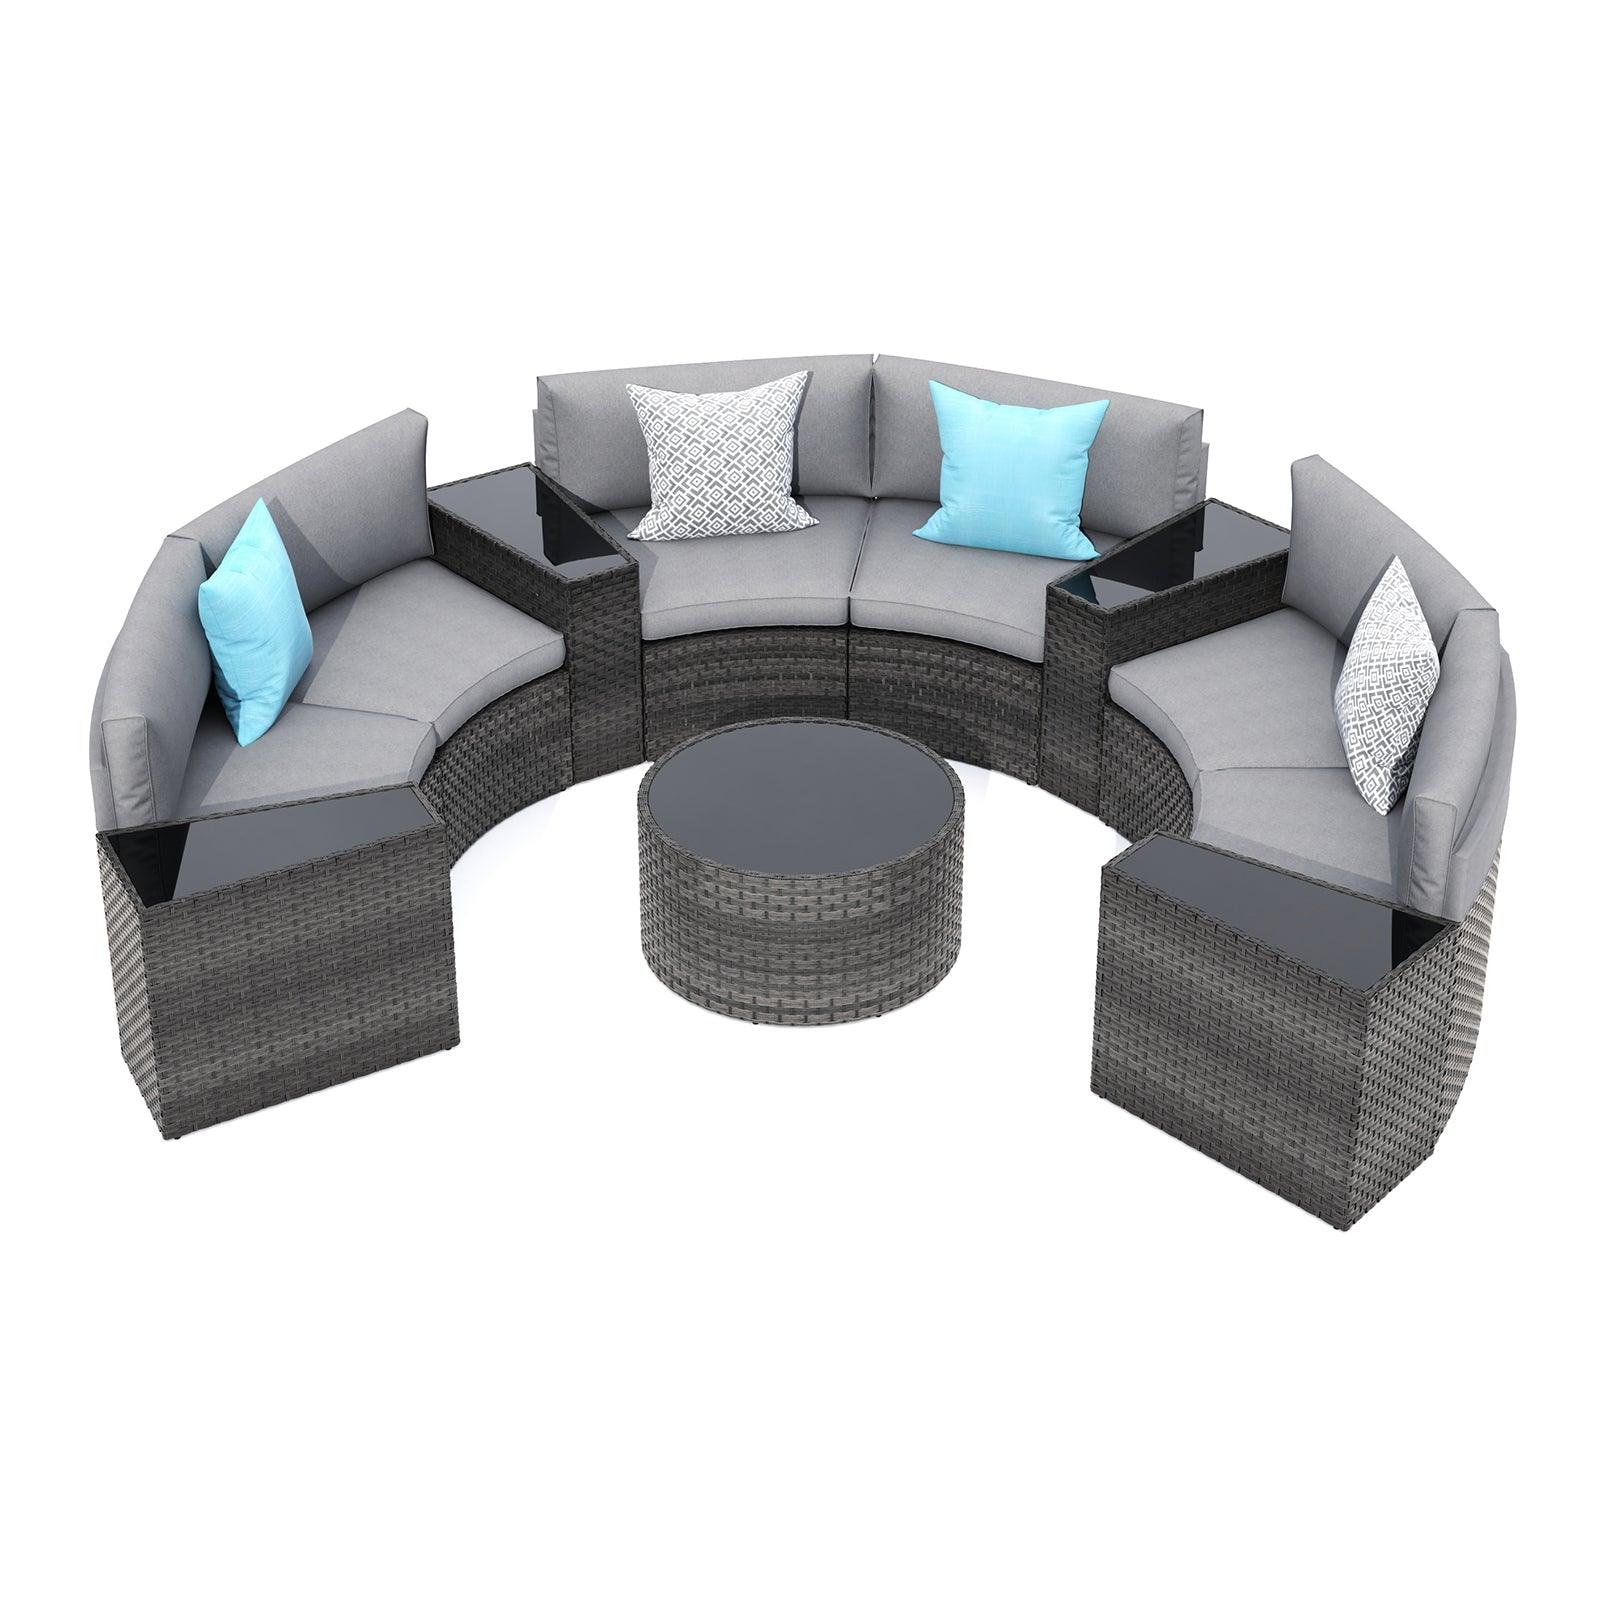 Halo IV 11-pc. Outdoor Curved Sectionals, Outdoor Half-Moon Sectional Set, Grey sale #Pieces_11-pc.